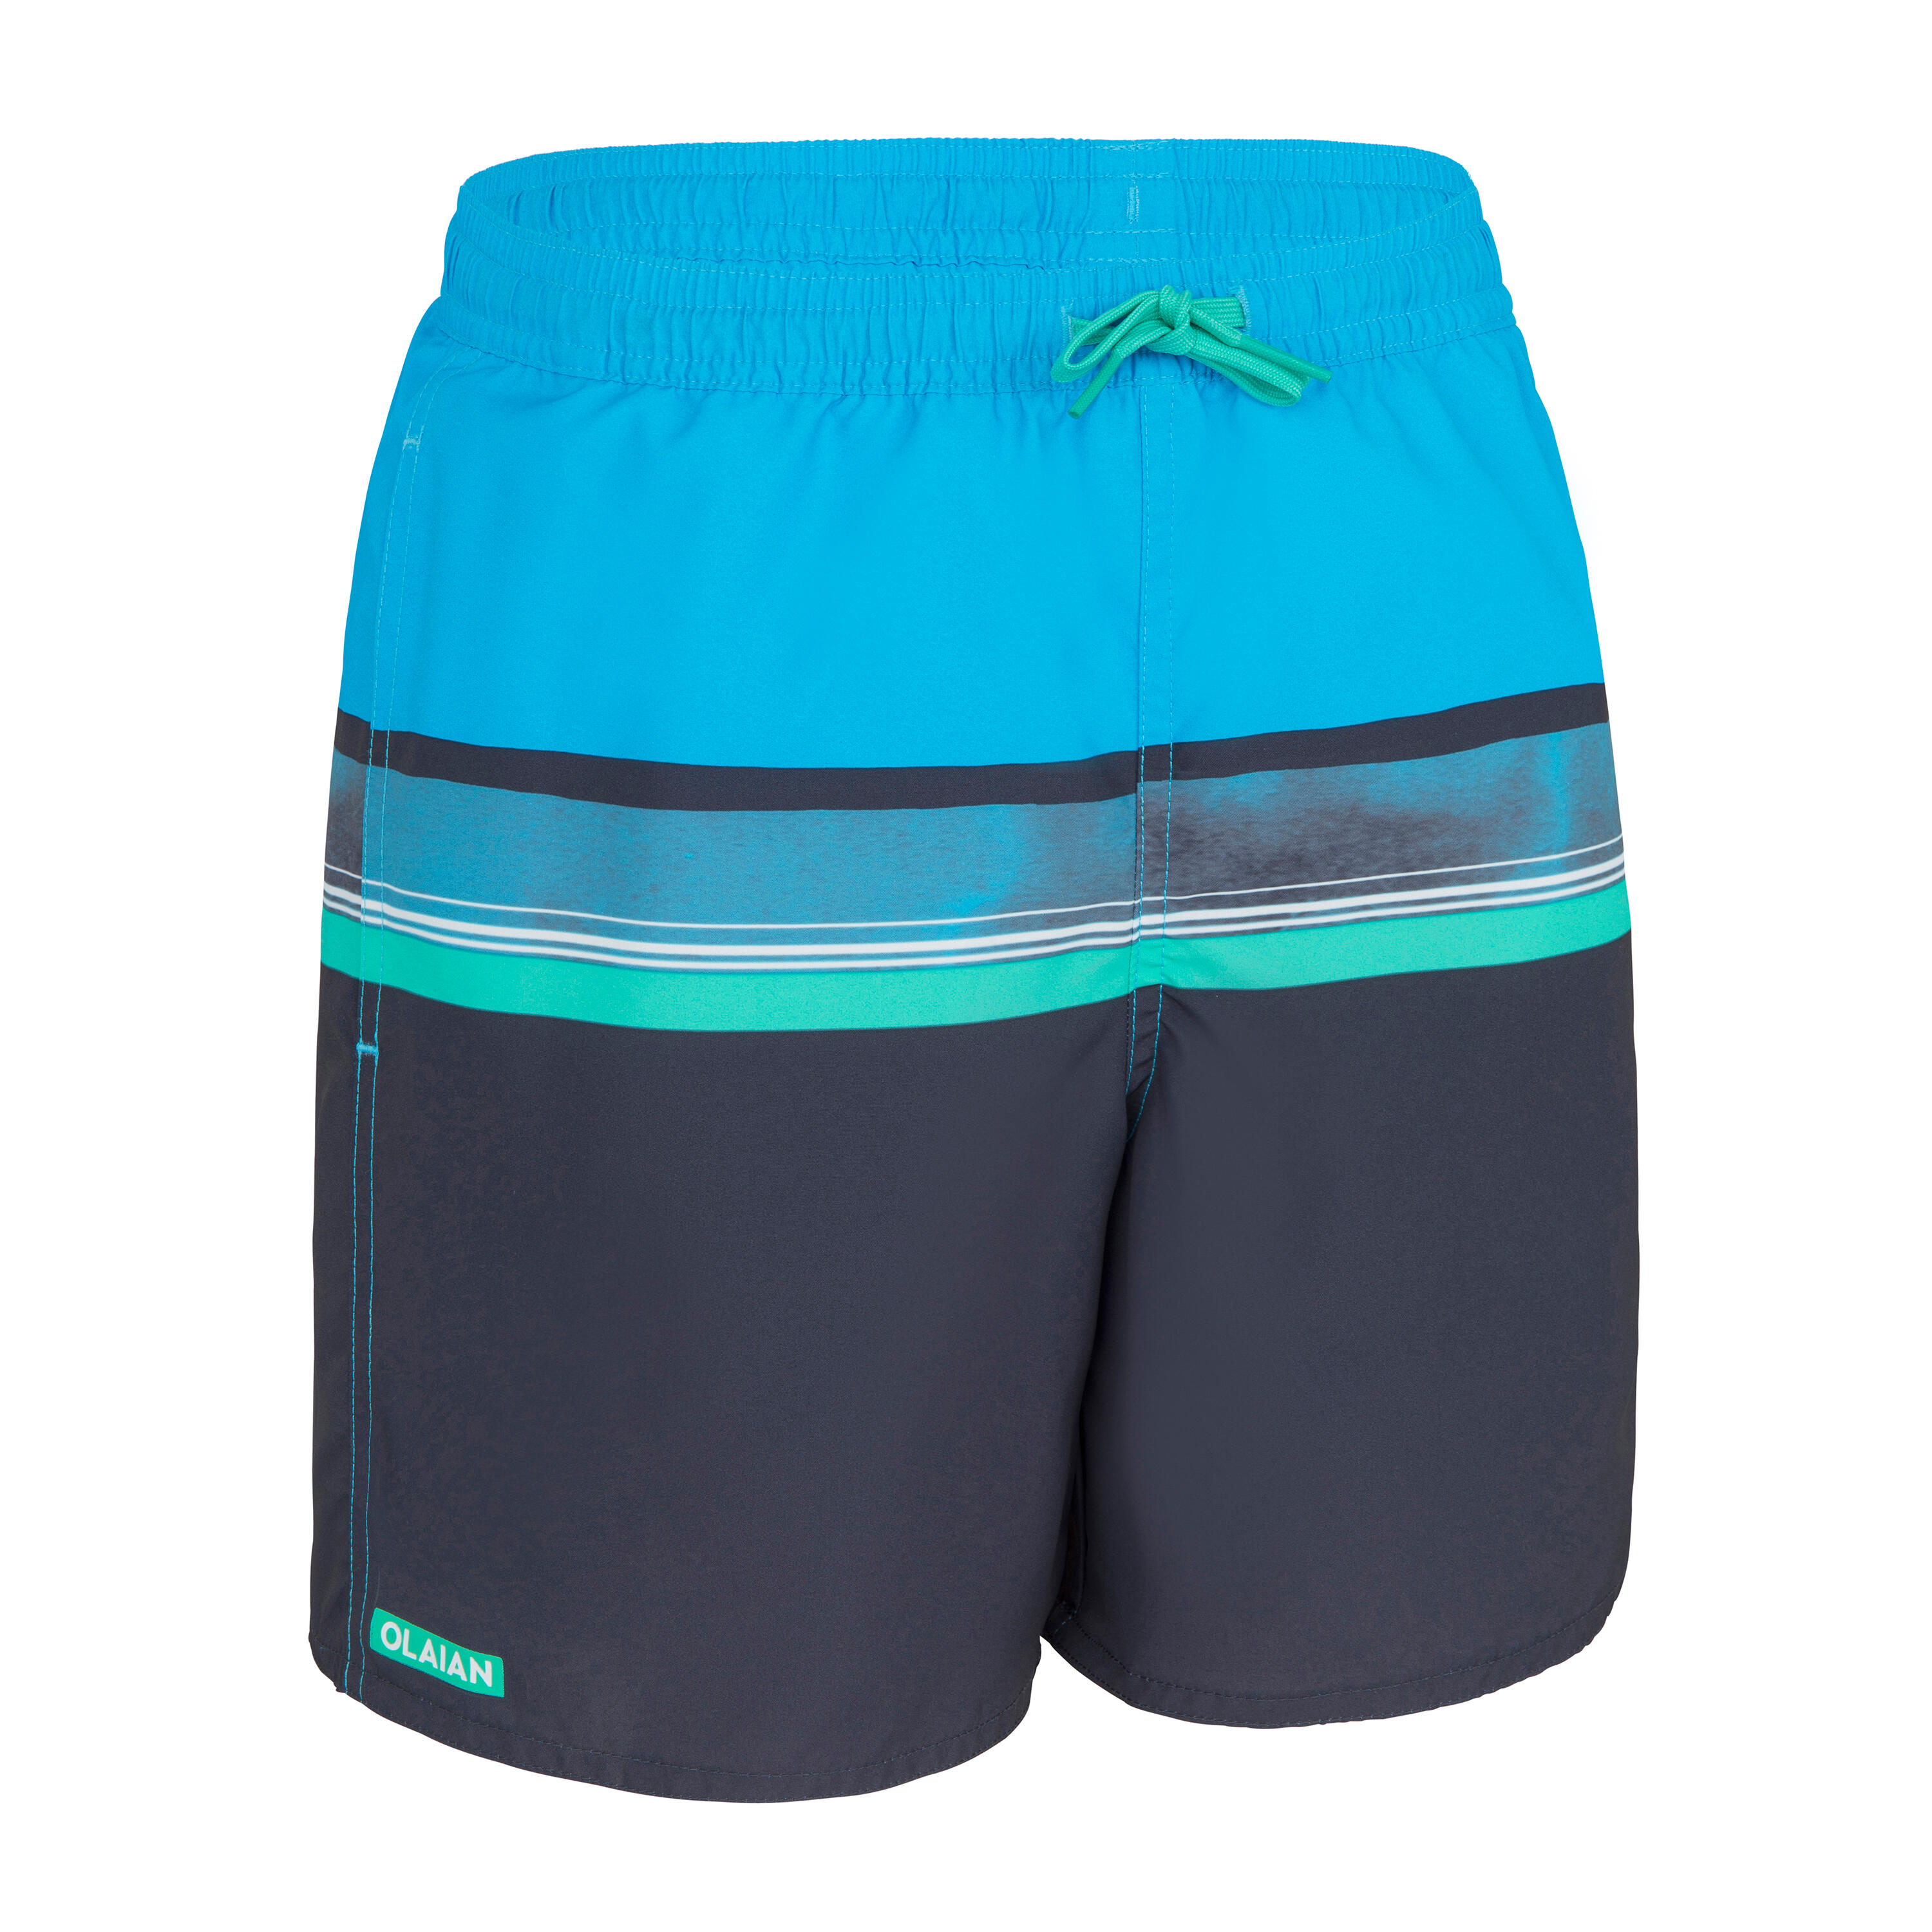 Boys Swimming Set 100 START Includes: Swimming trunks, goggles